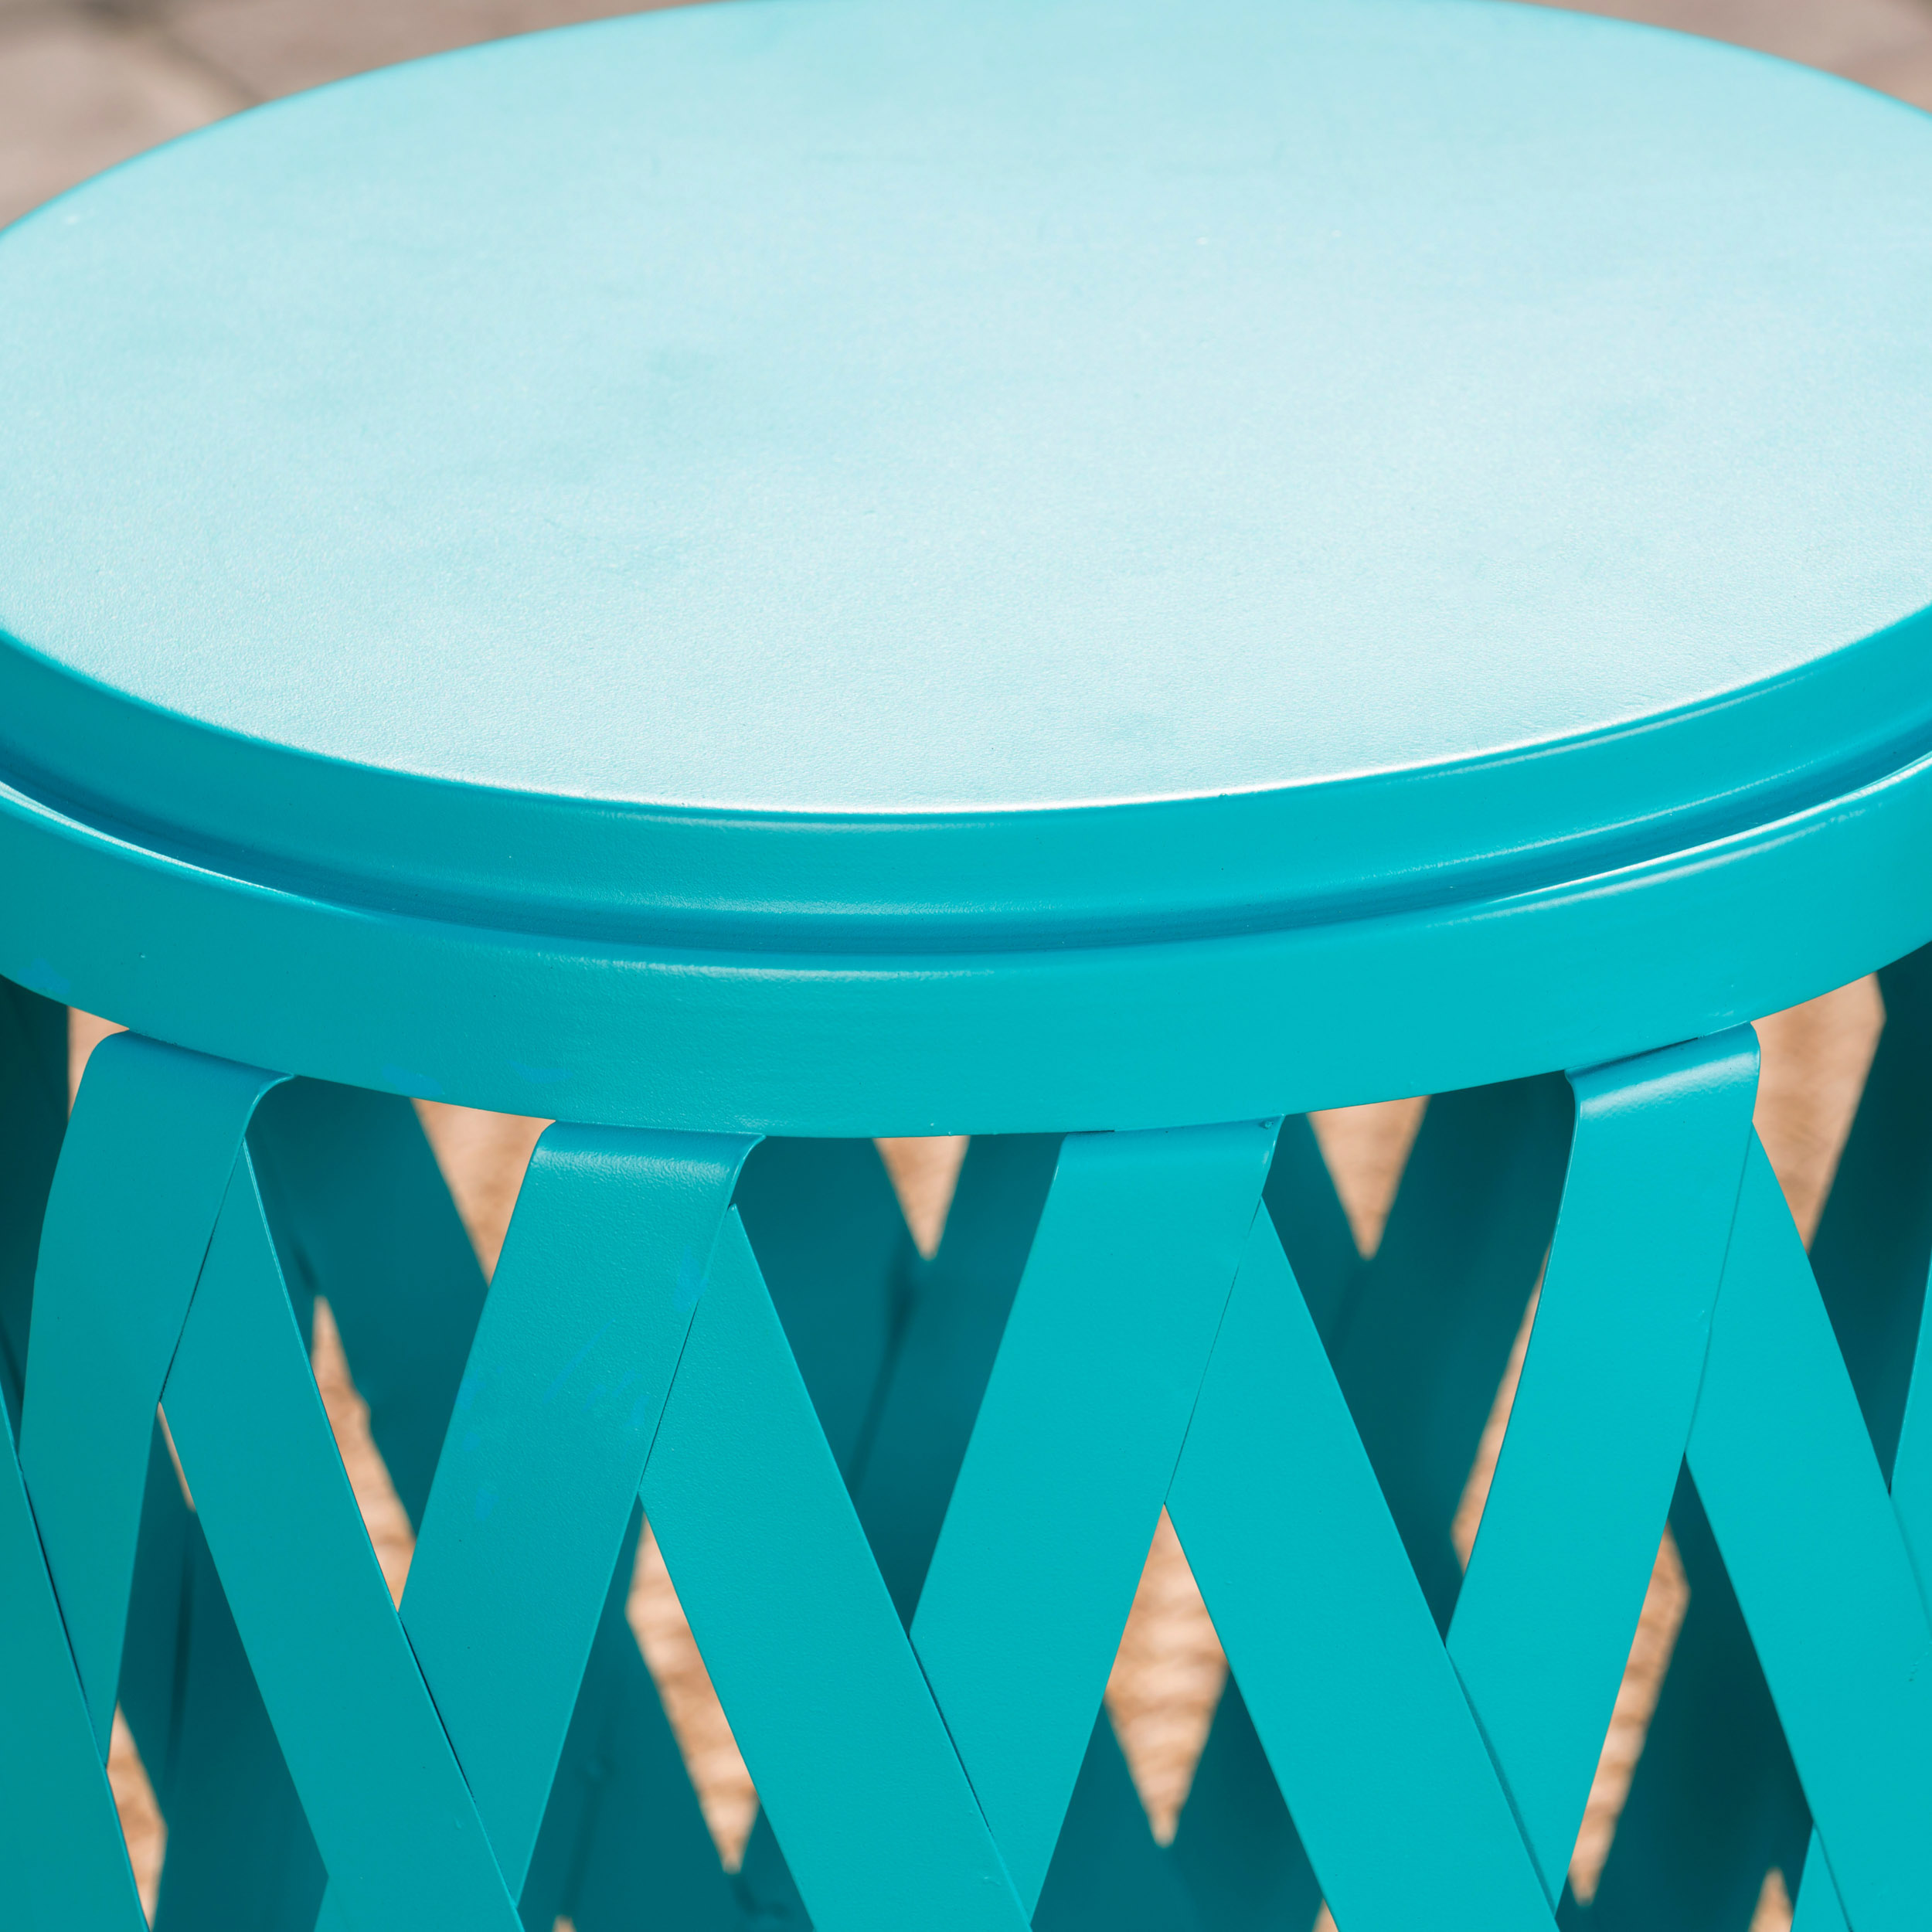 Aubriella Outdoor 14 Inch Diameter Iron Side Table, Teal - image 2 of 4